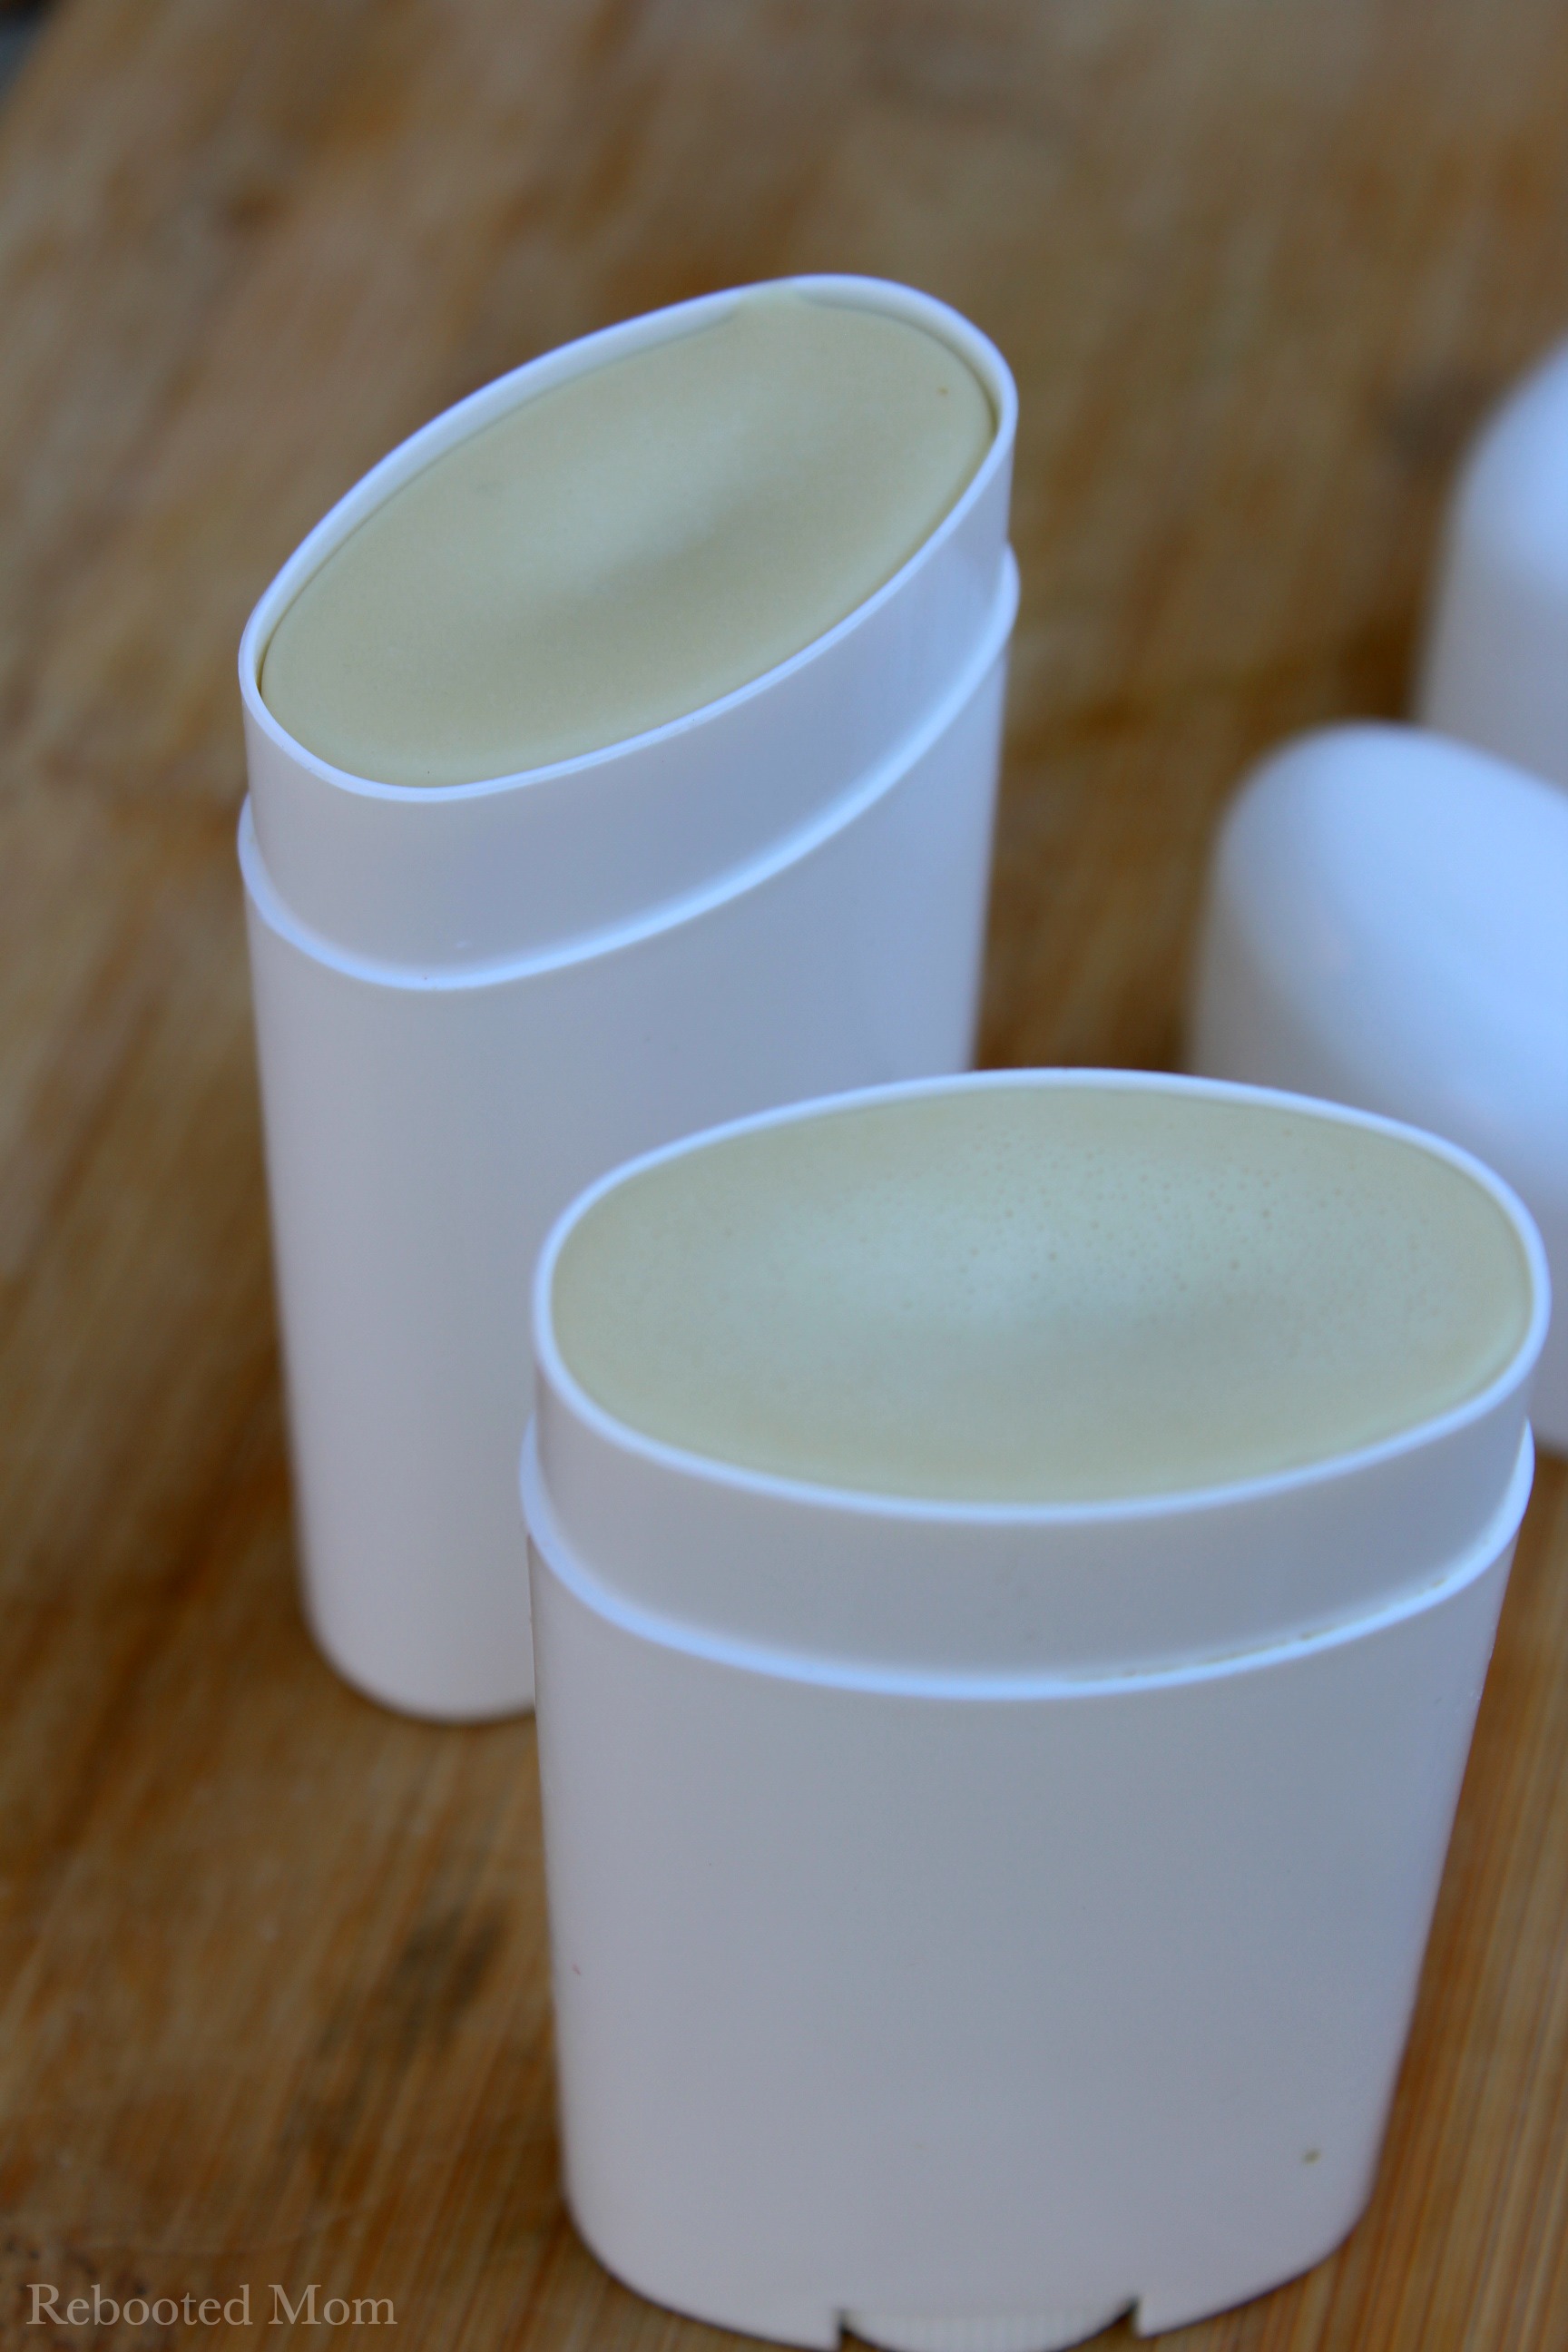 A fast and easy solid deodorant stick that's gentle, effective, and really works! This recipe makes 2 DIY deodorant sticks.